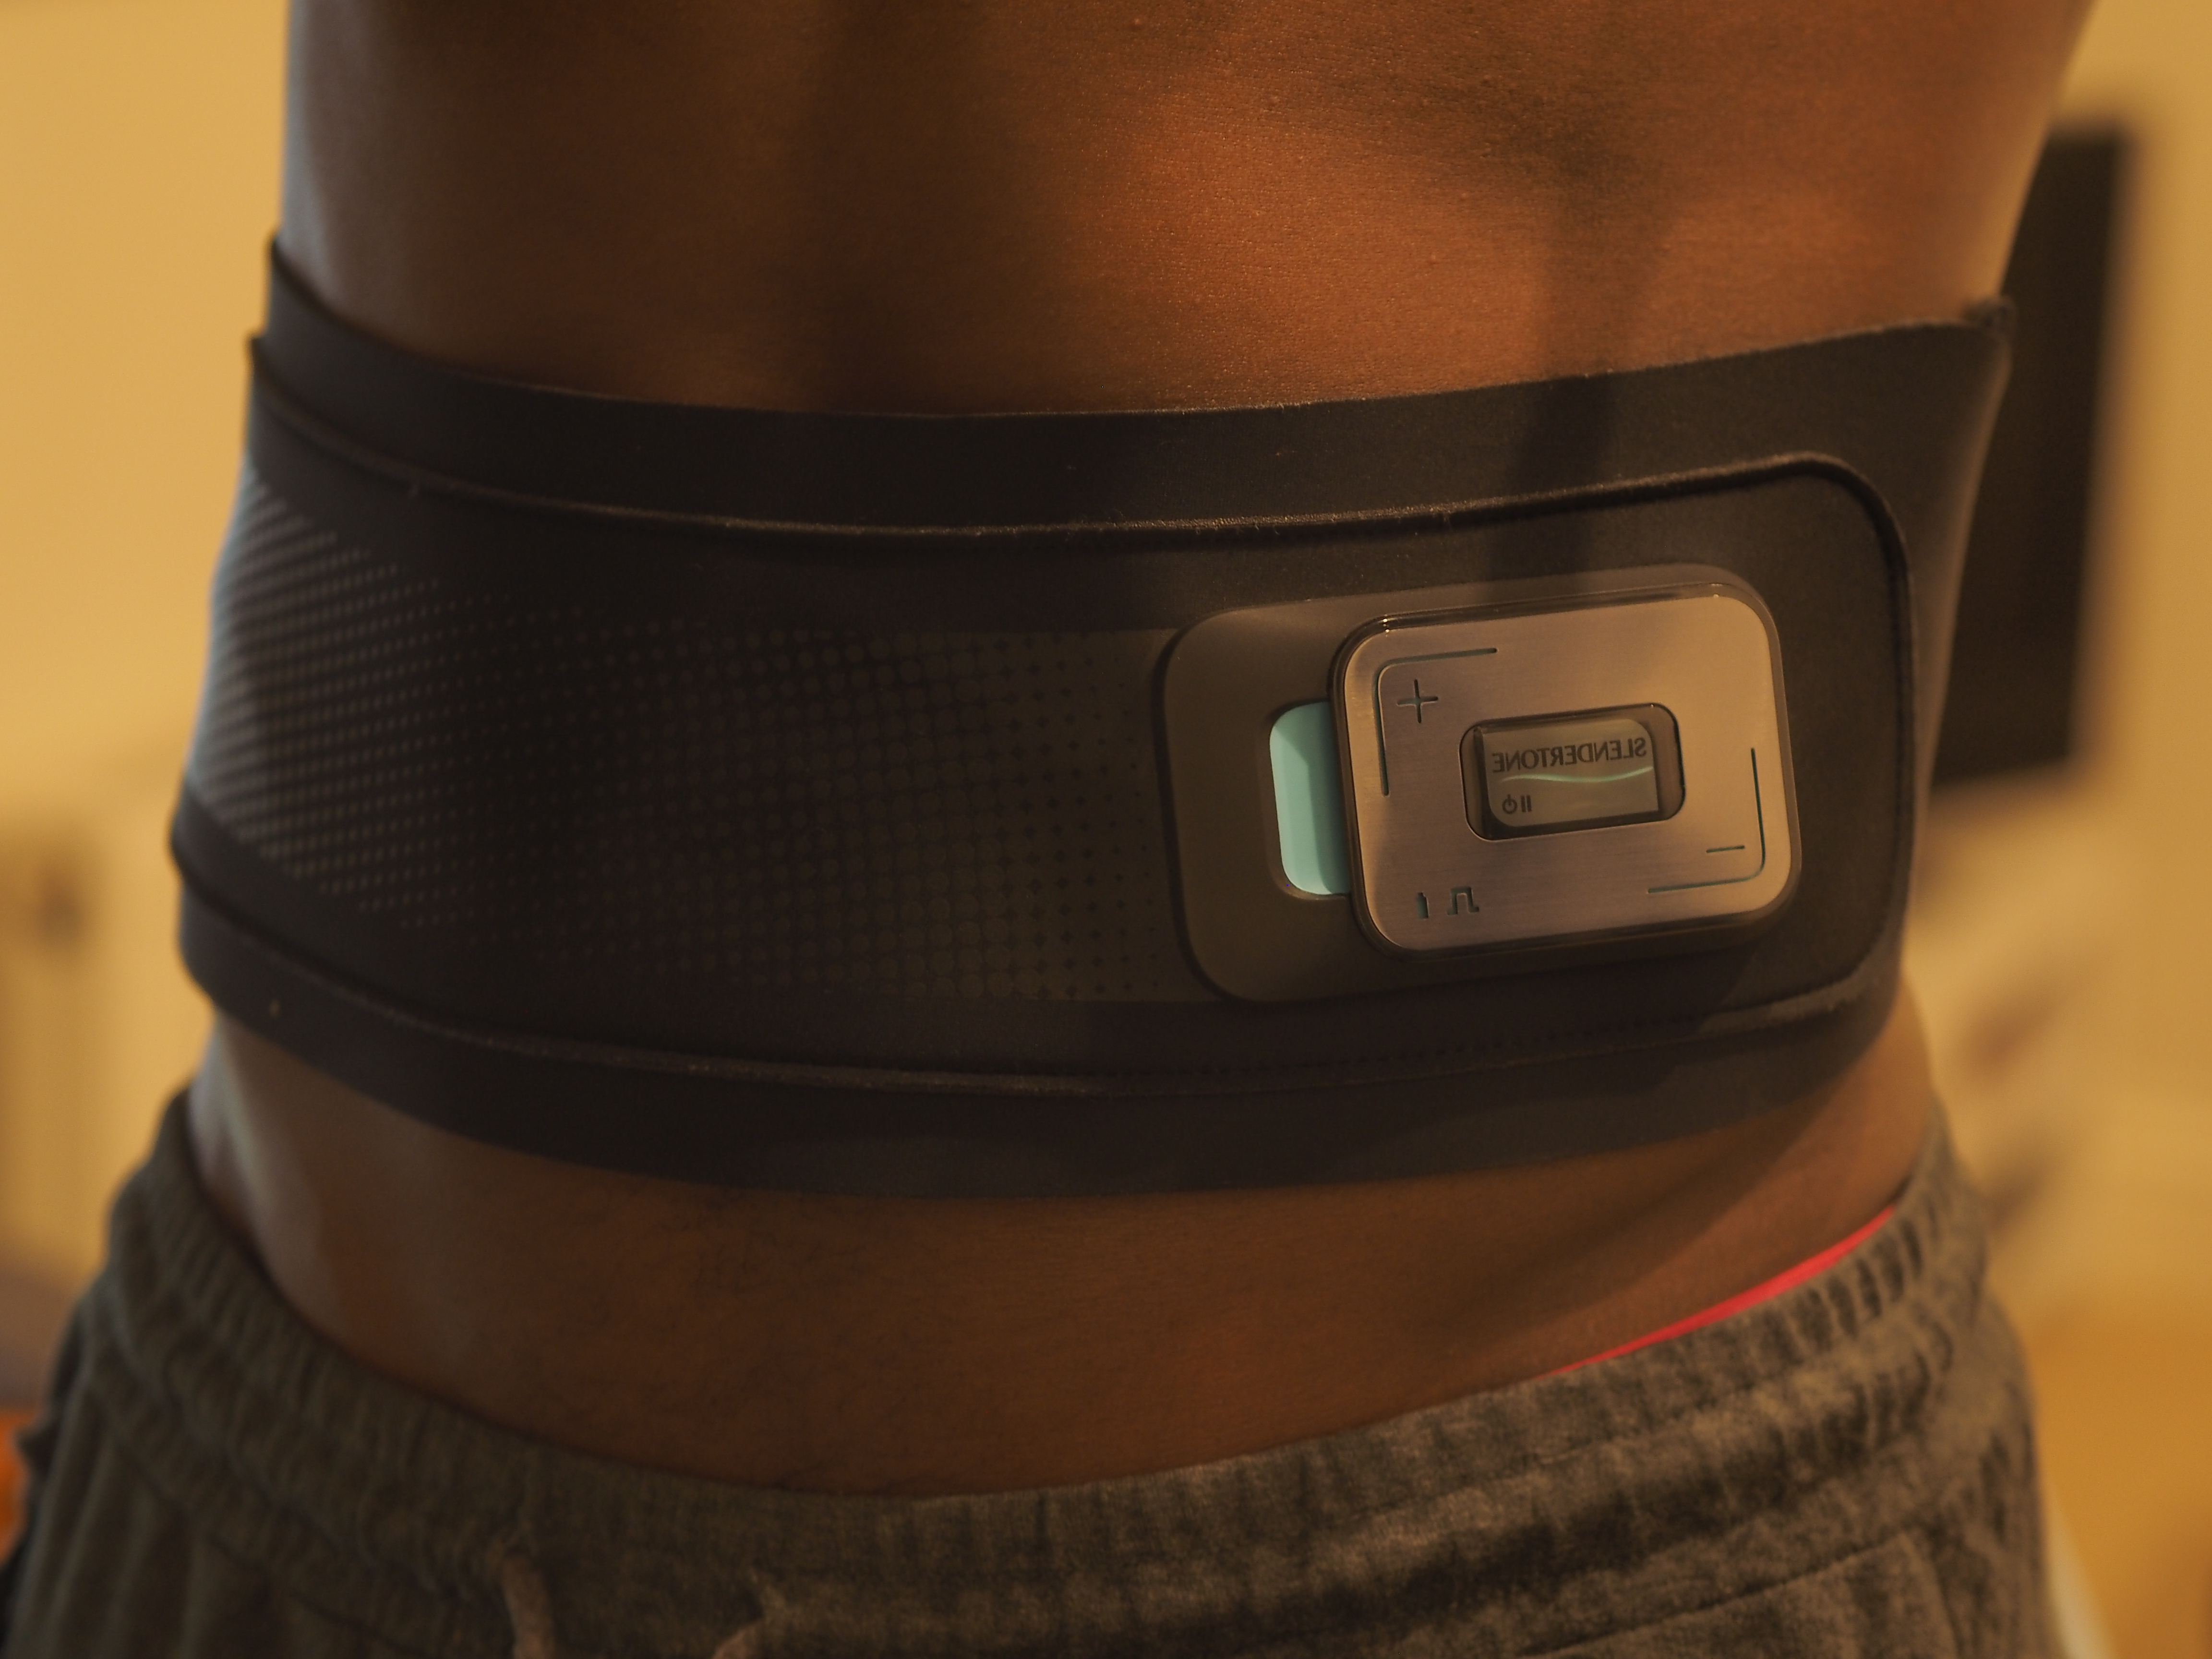 Slendertone: It’s not the gimmick we presumed it to be